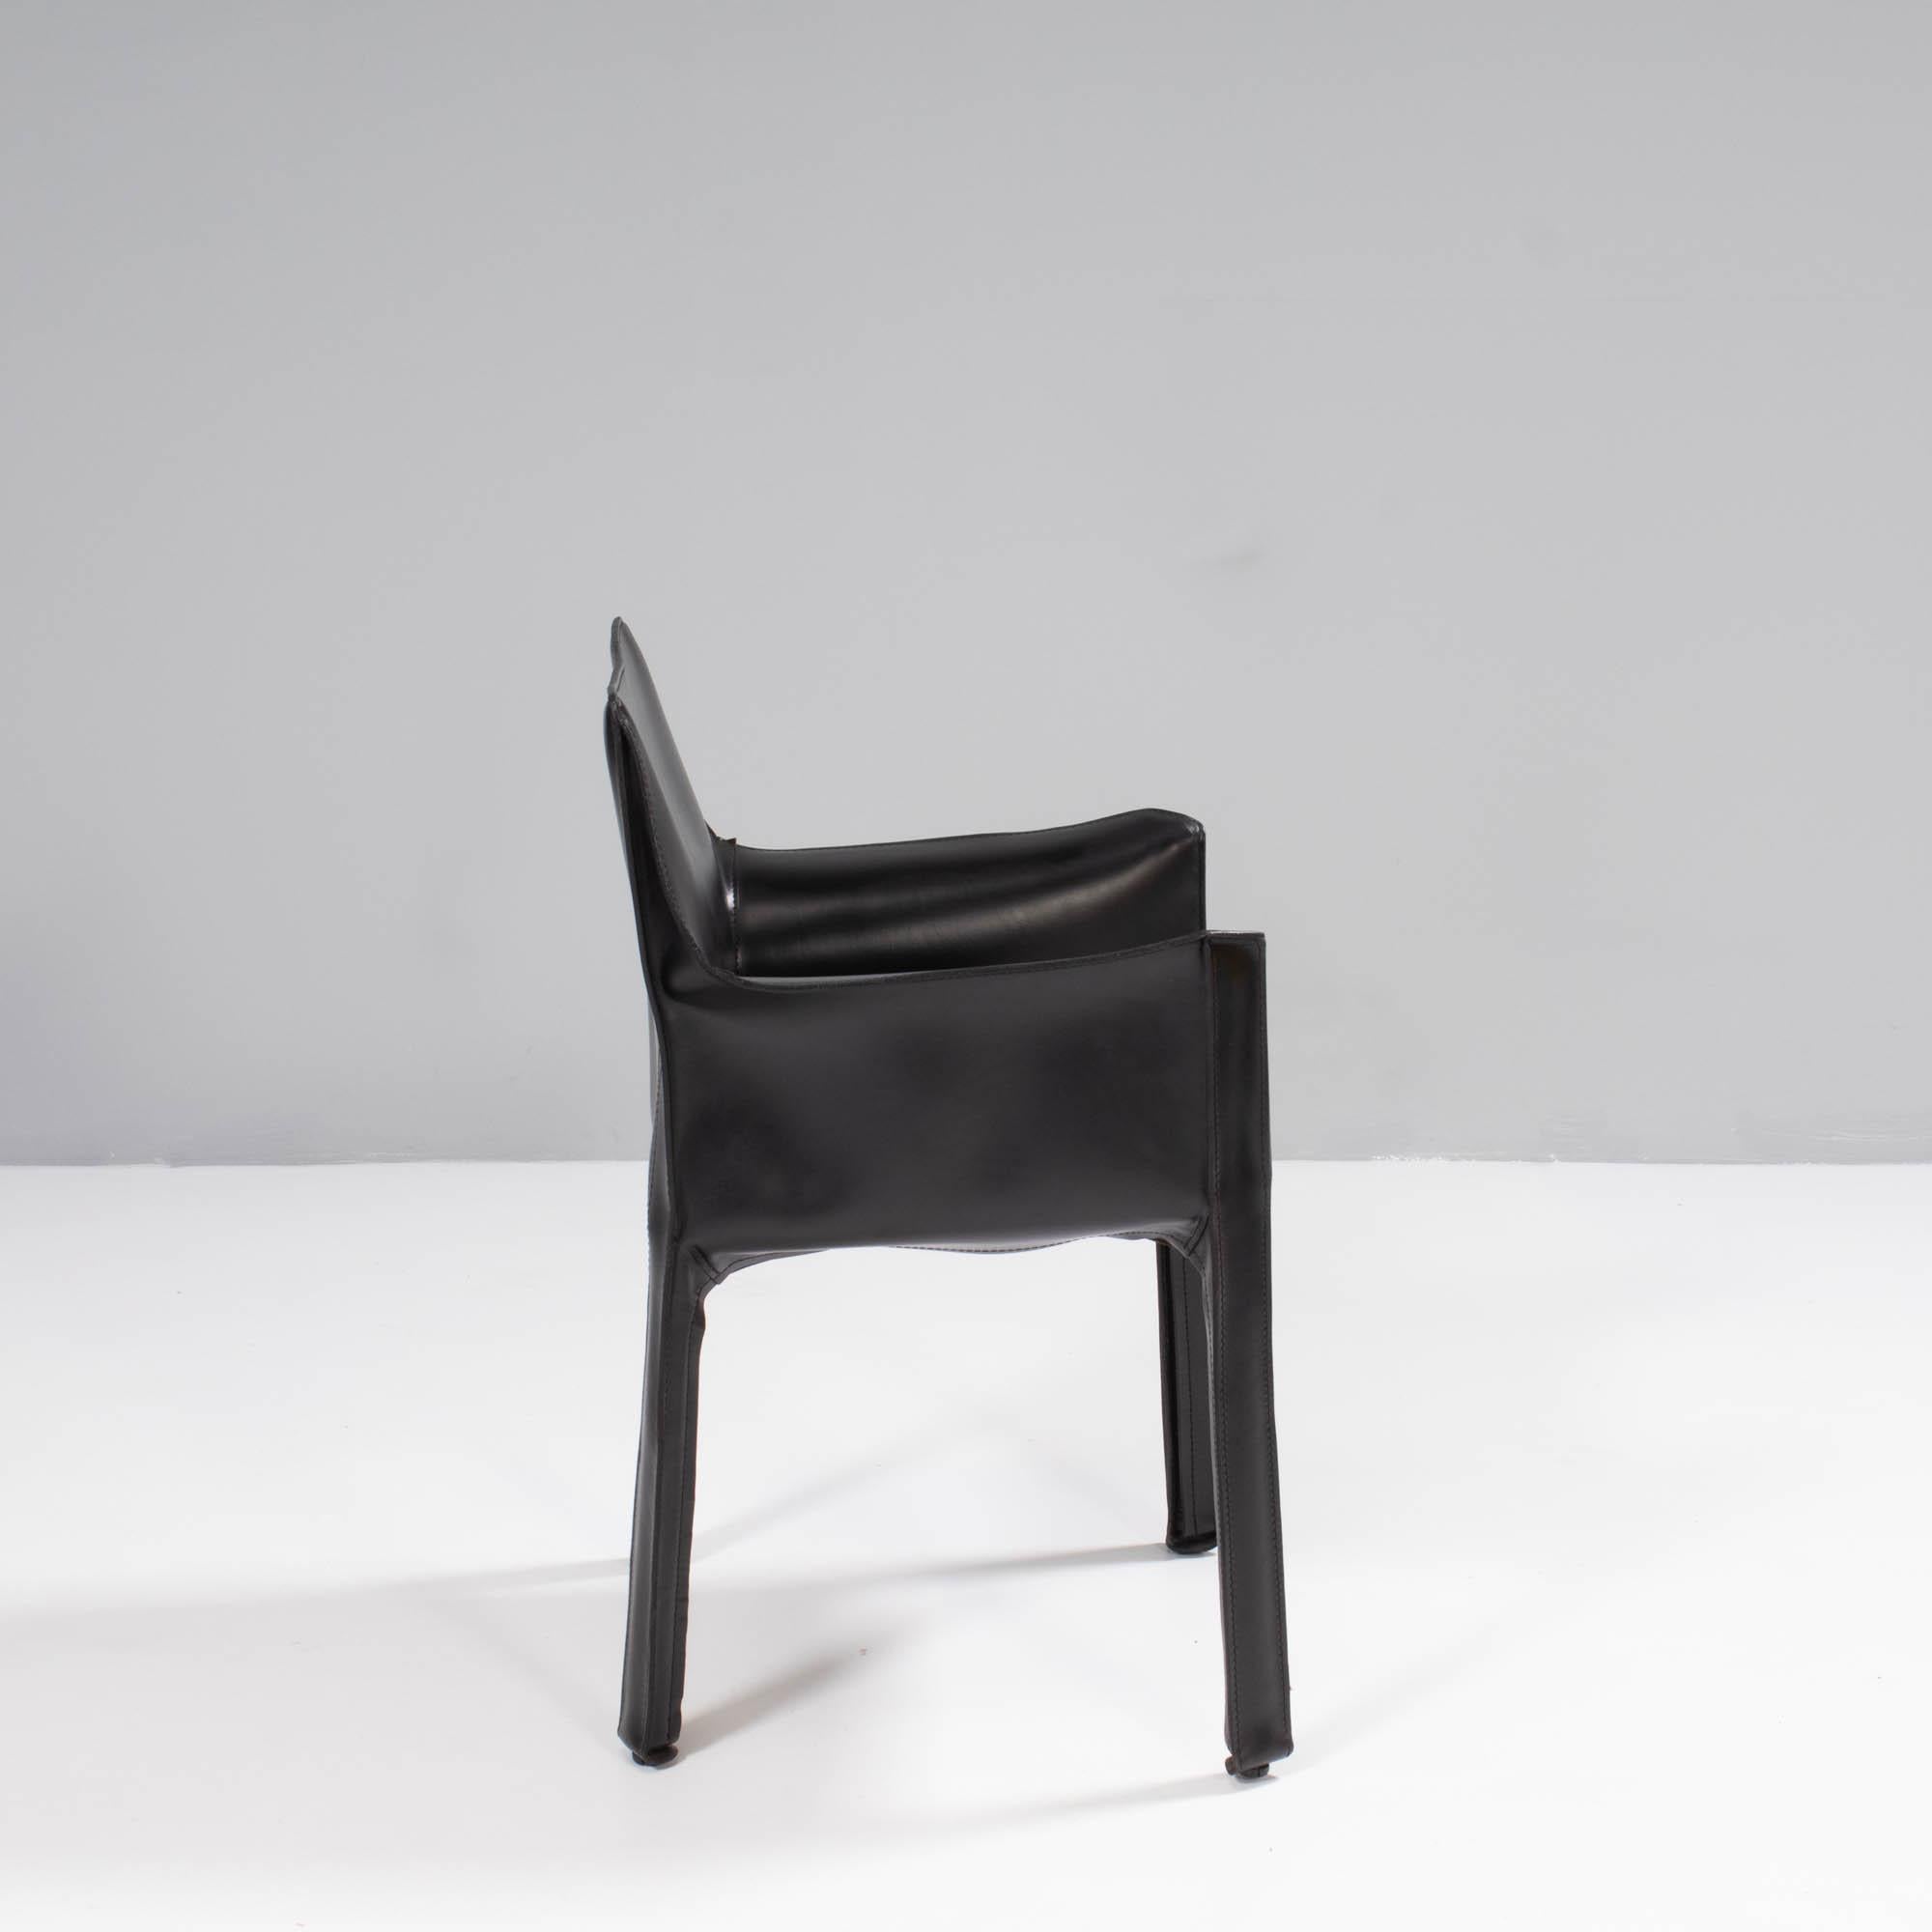 Designed by Mario Bellini in 1977, the Cab dining chairs have since become a signature piece in the Cassina furniture collection.

These original dining chairs are constructed from a steel frame and are covered in black leather upholstery, held in